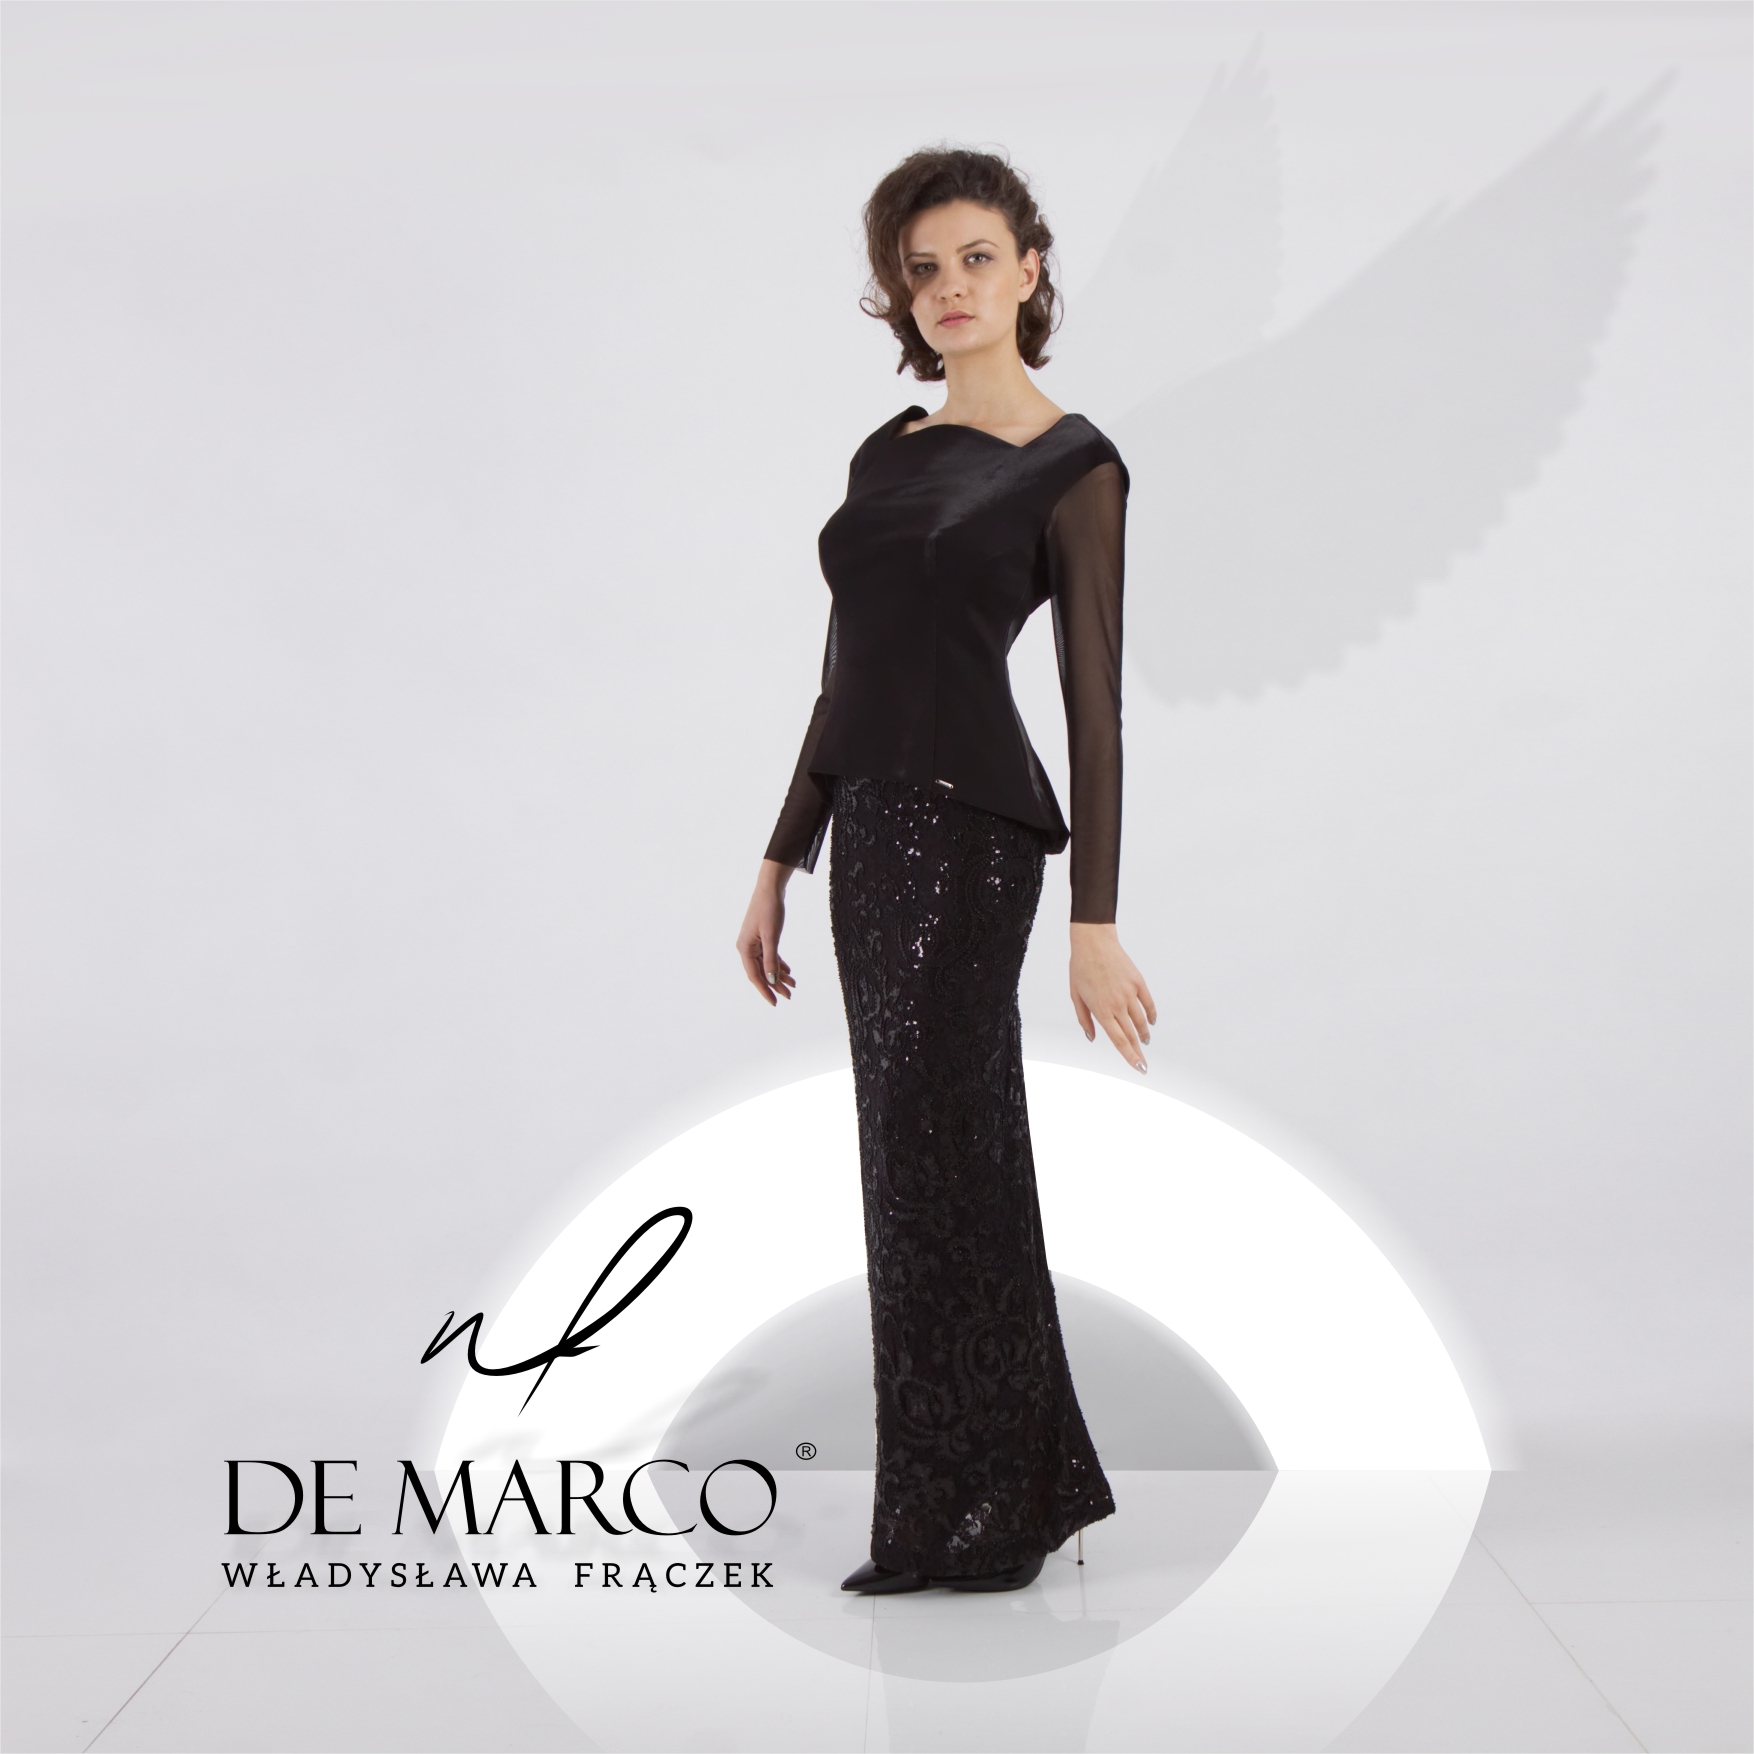 Evening dress for special occasions